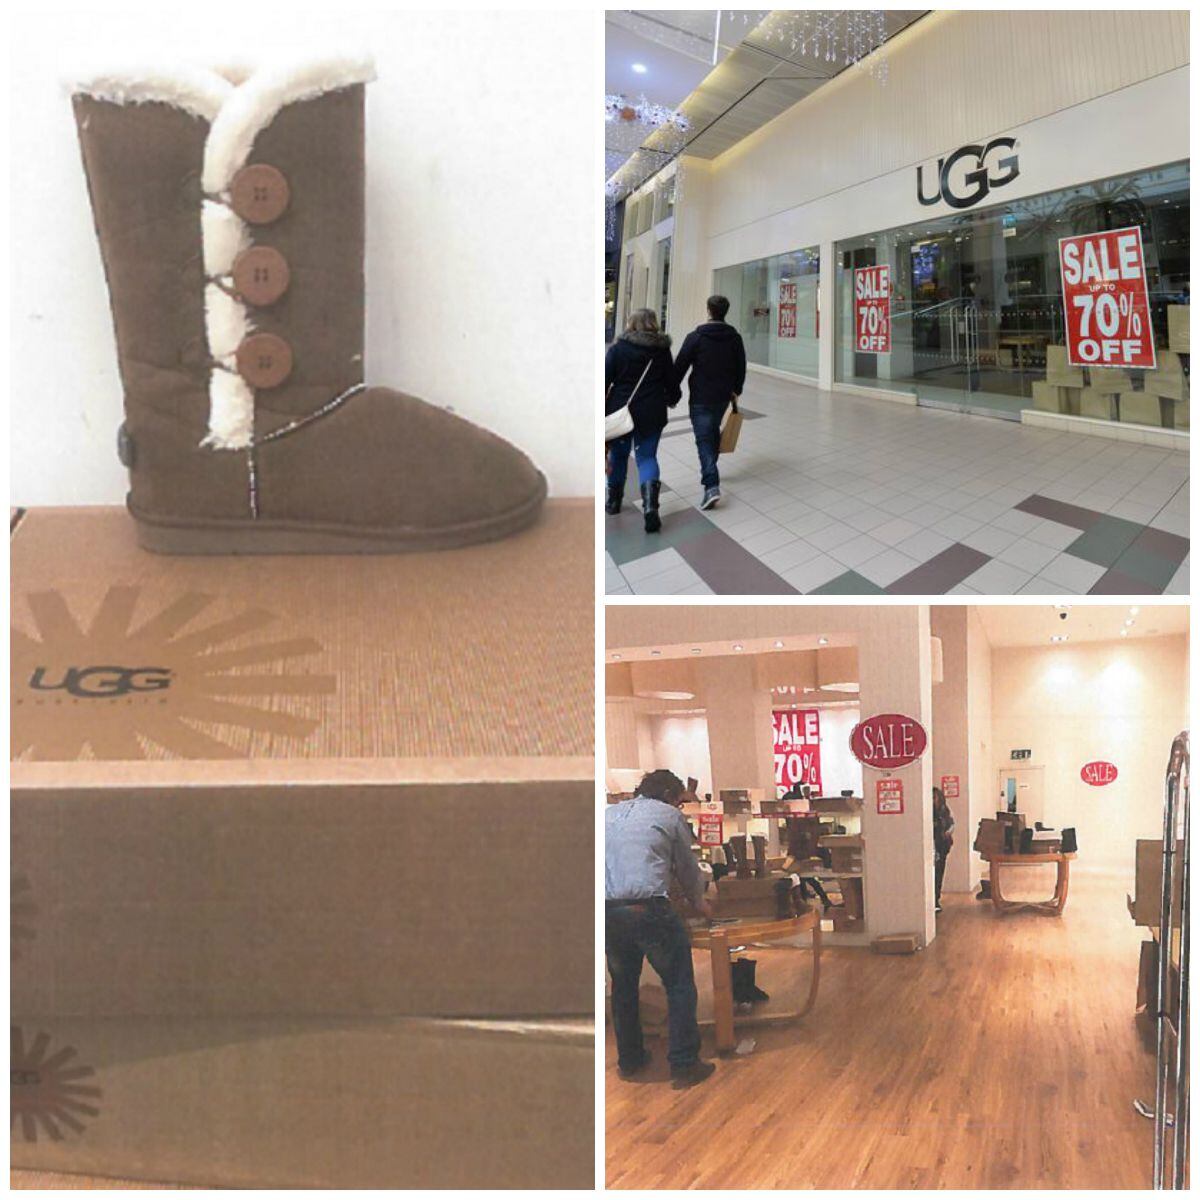 The boots were on sale at a shop in the former Pavilions shopping centre